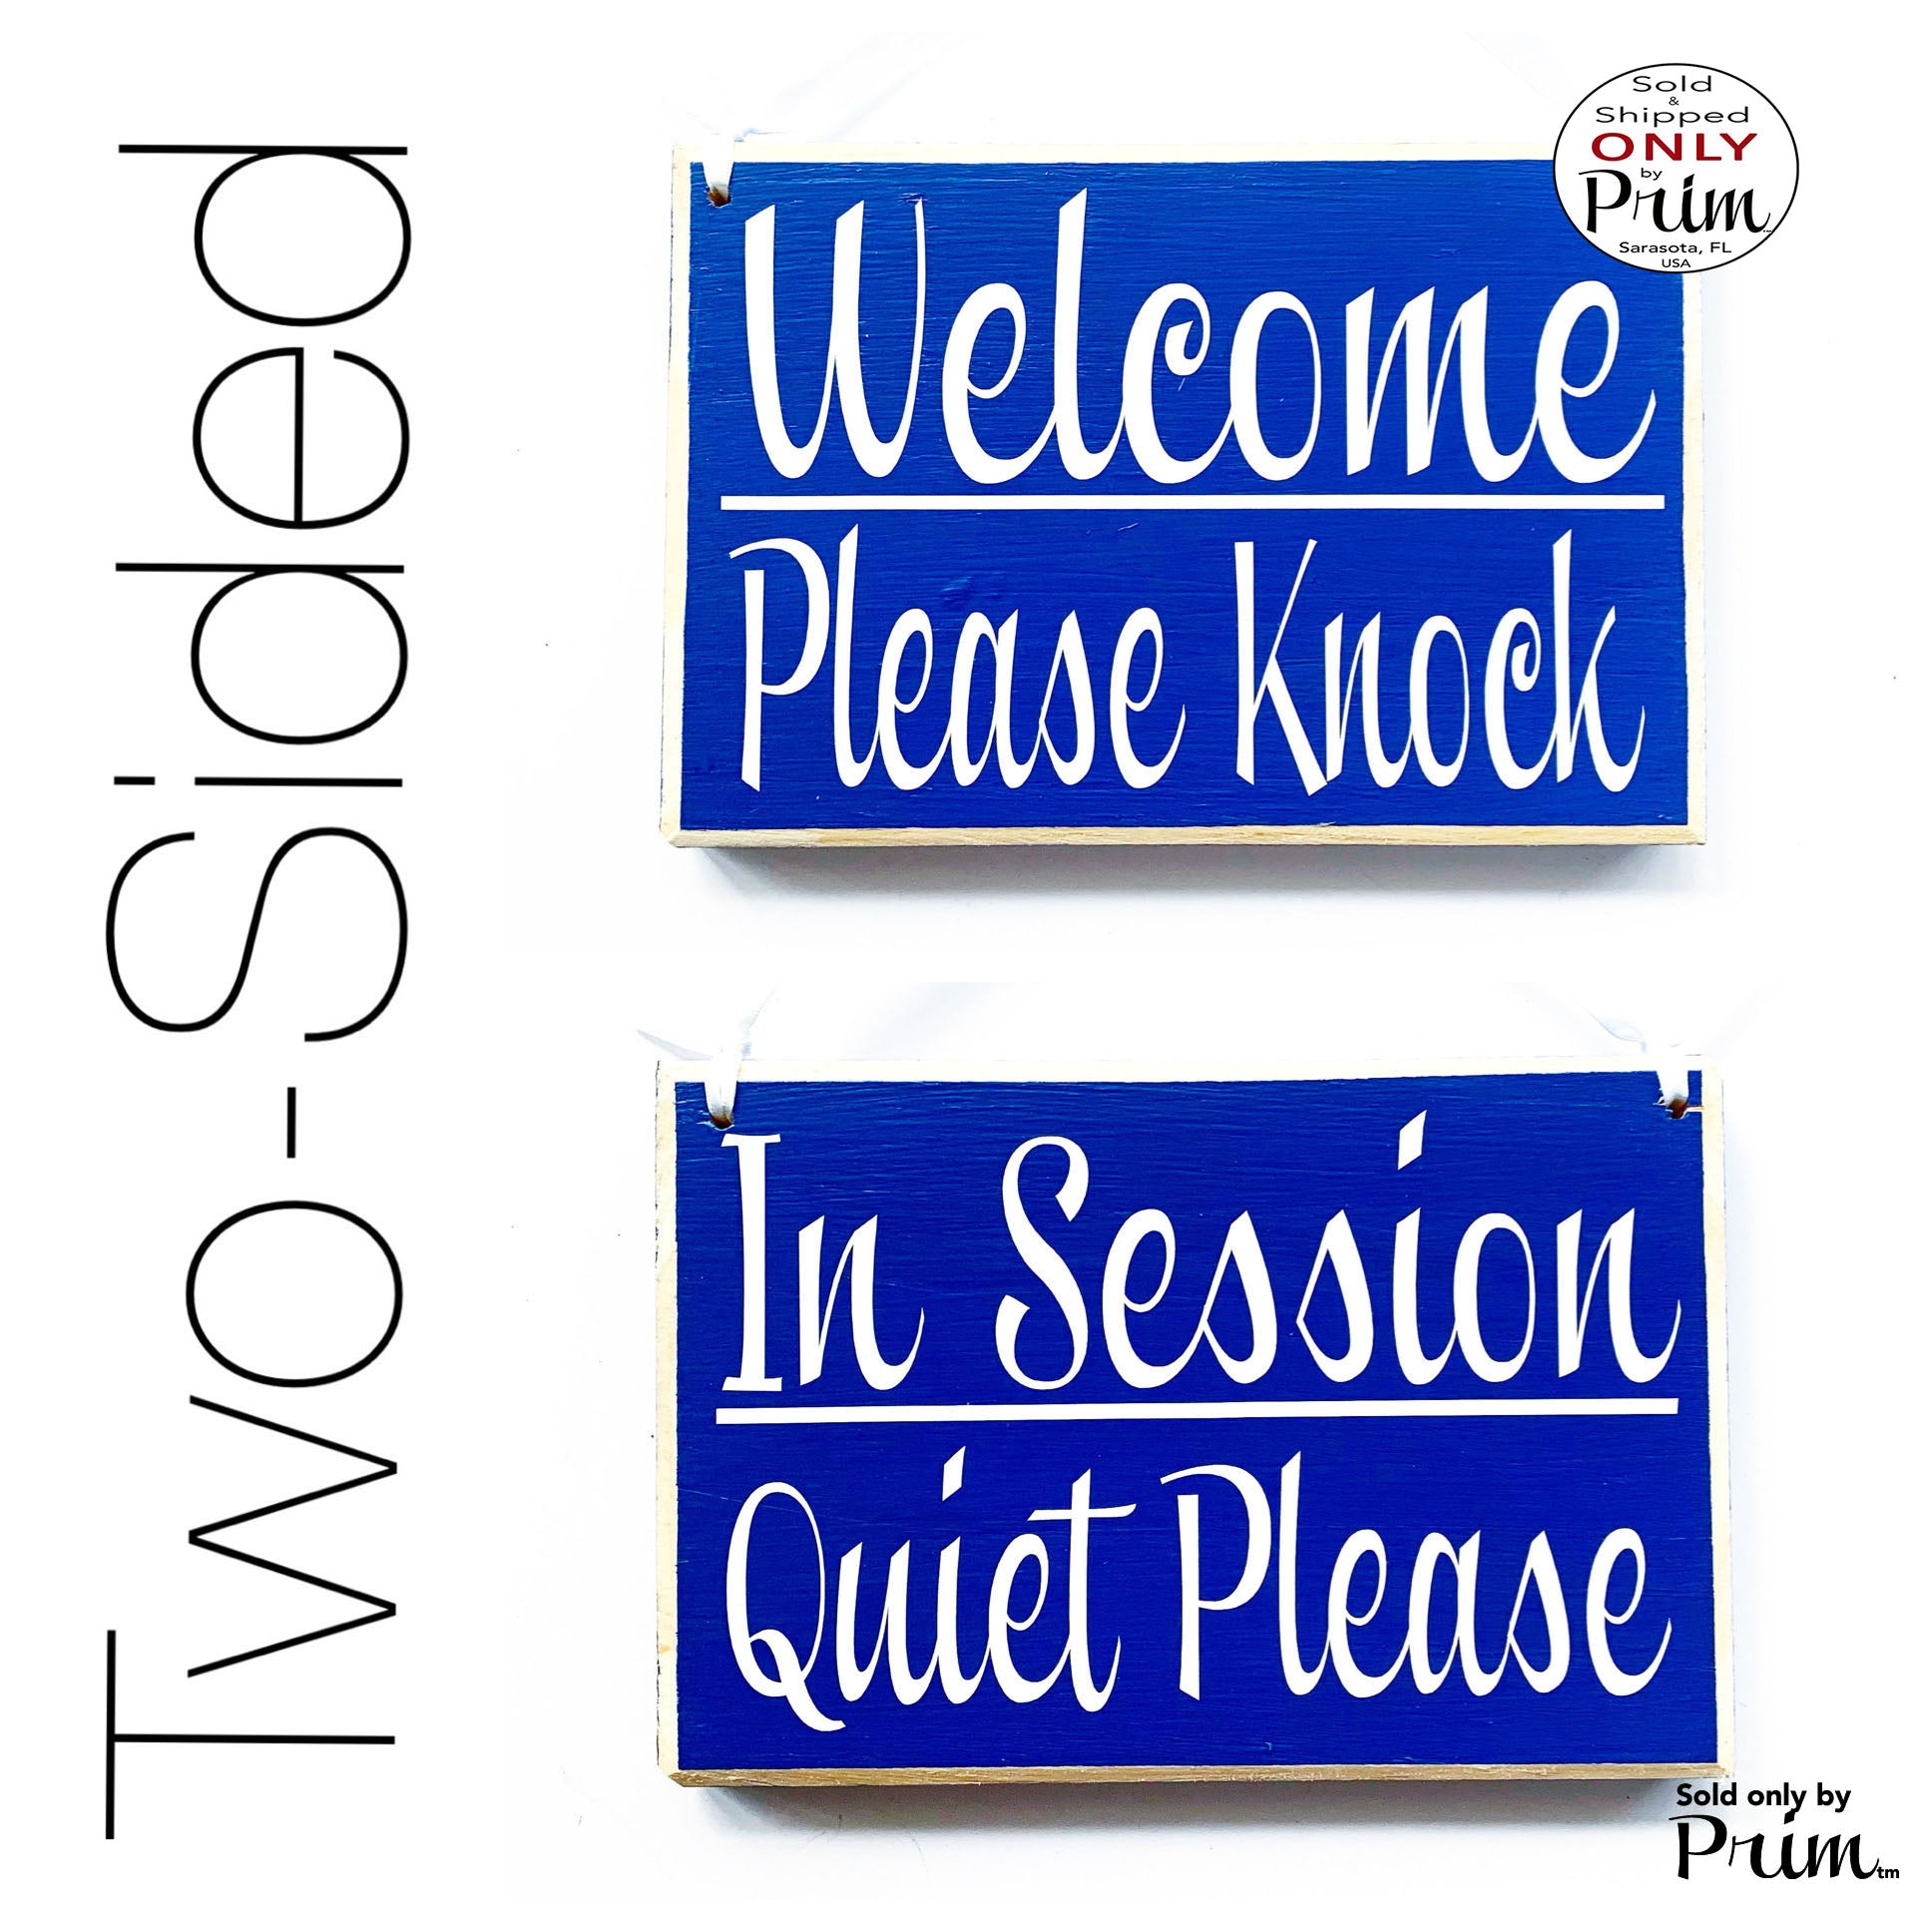 Two Sided 8x6 In Session Quiet Please Welcome Please Knock Custom Wood Sign Please Do Not Disturb Service Meeting Office Door Hanger Plaque Designs by Prim